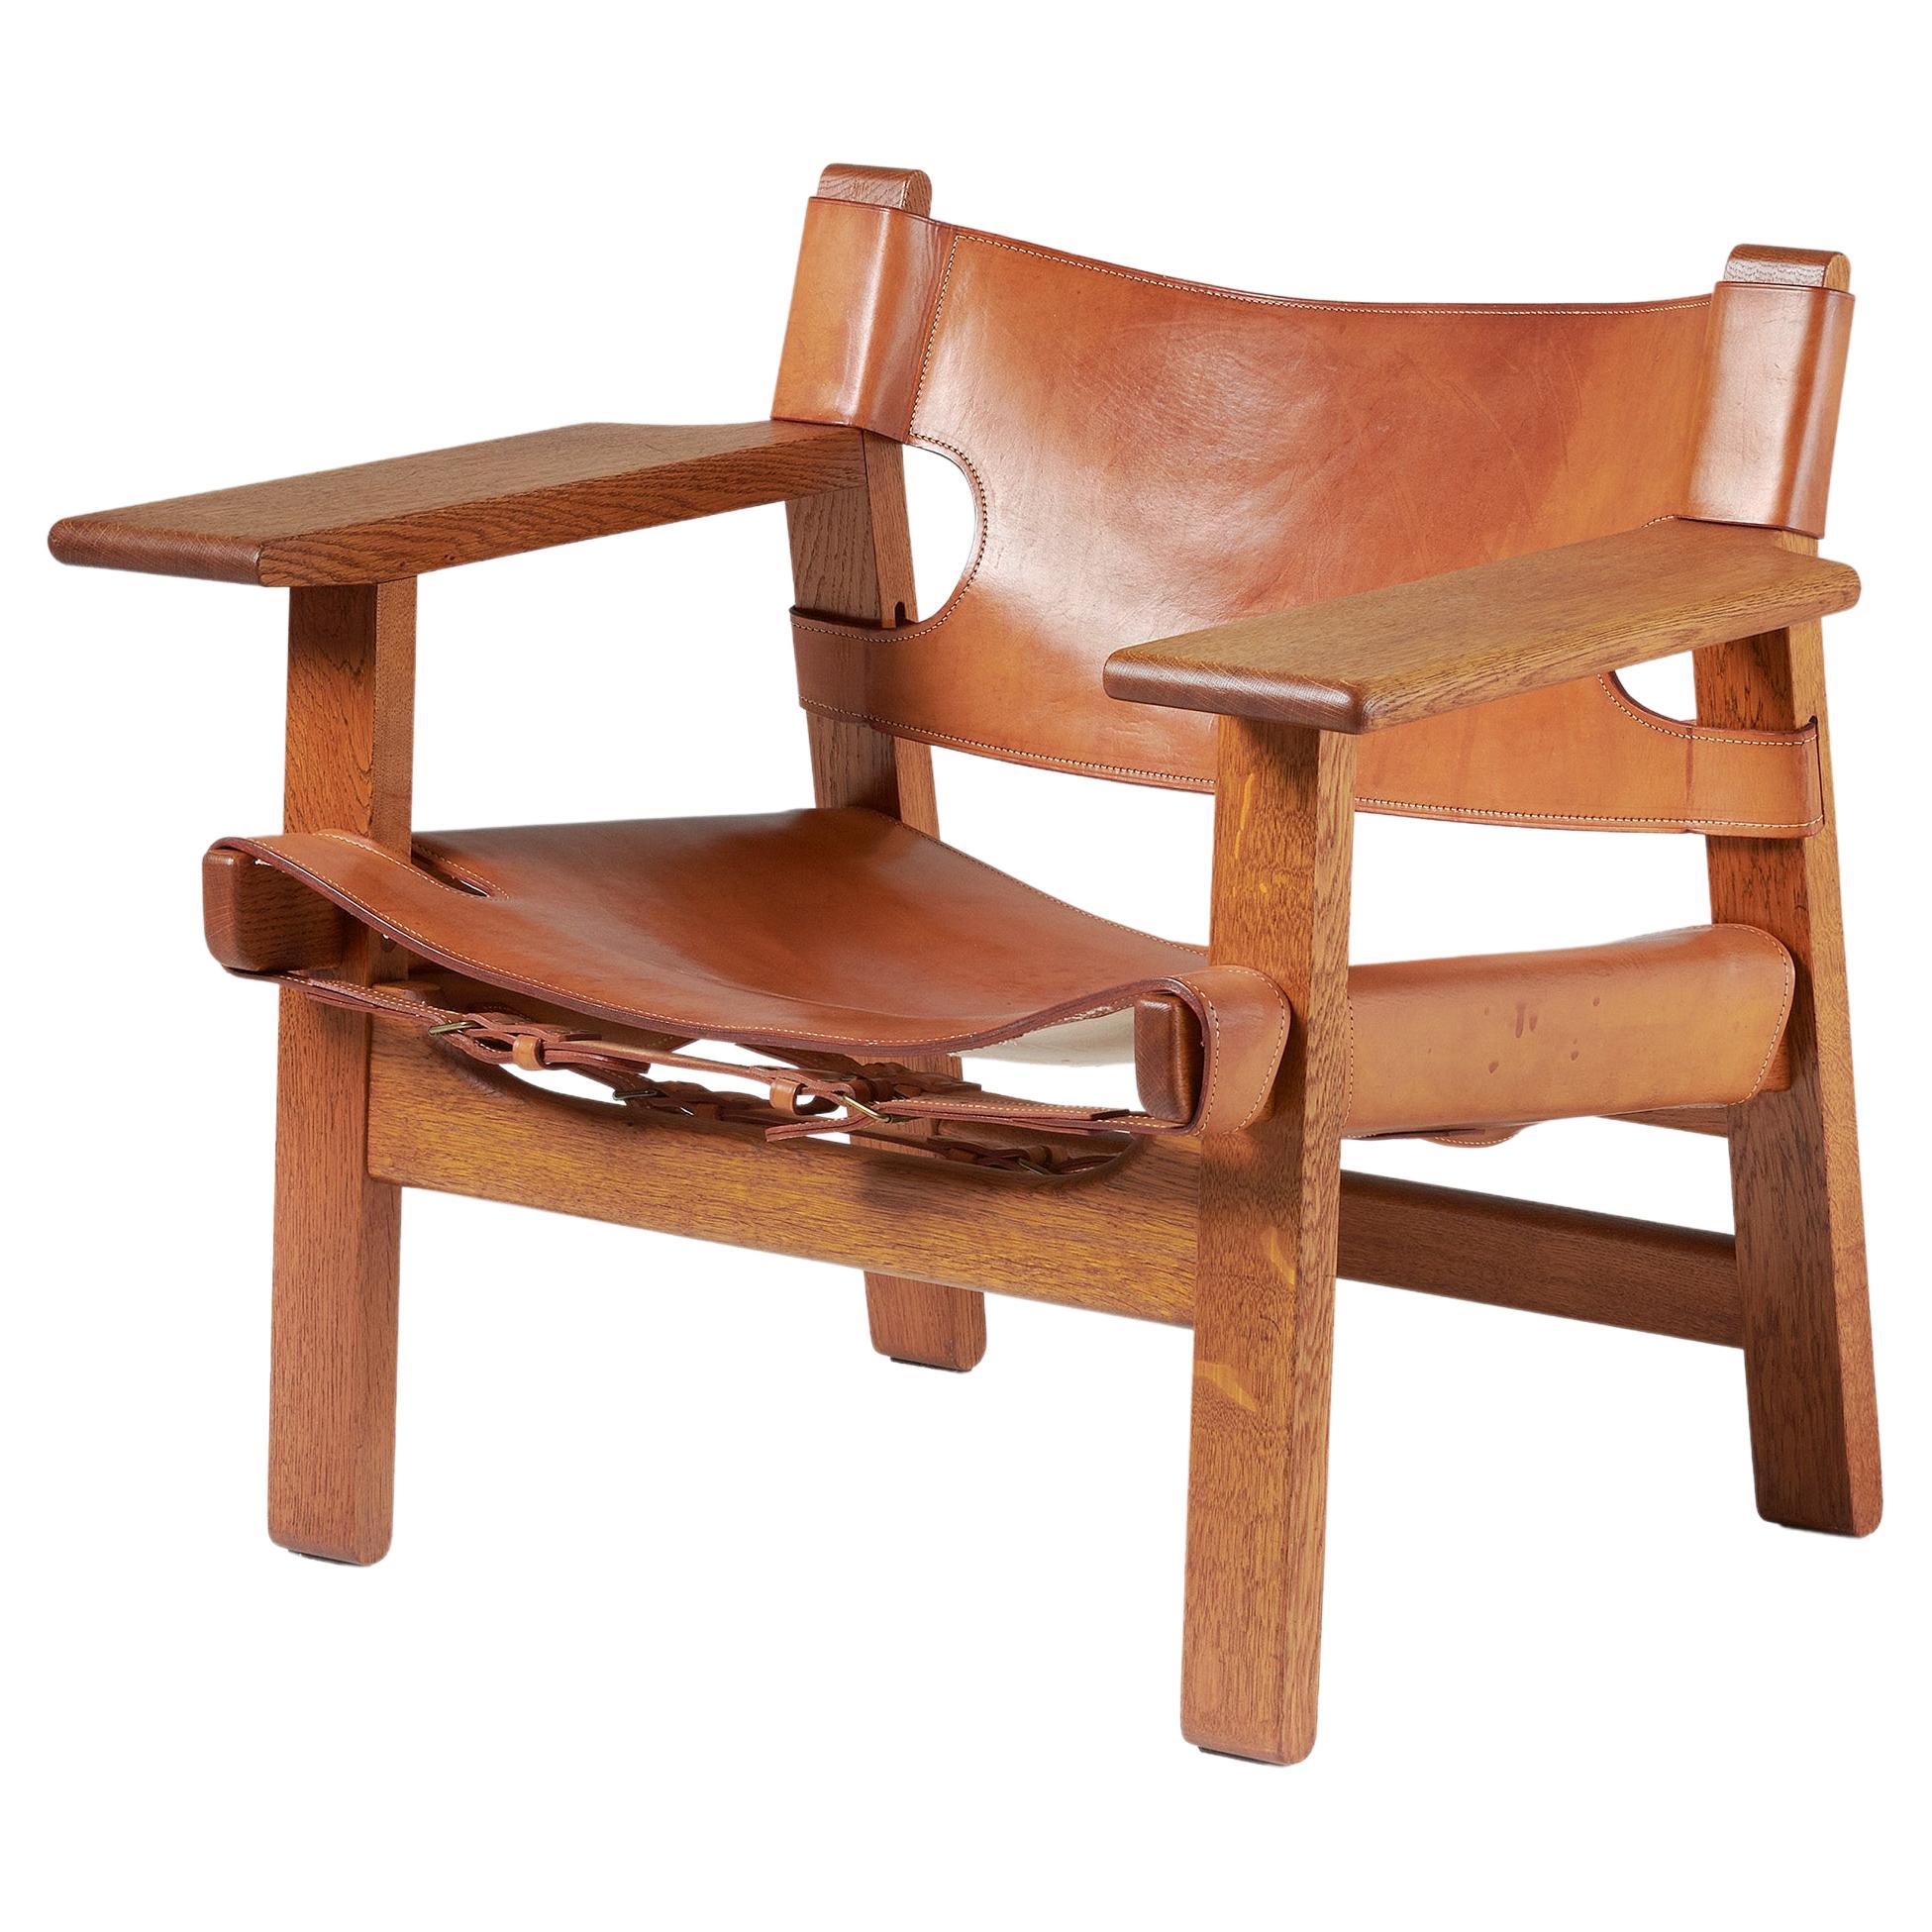 Børge Mogensen Spanish Chair, Oak and Leather, 1958 For Sale